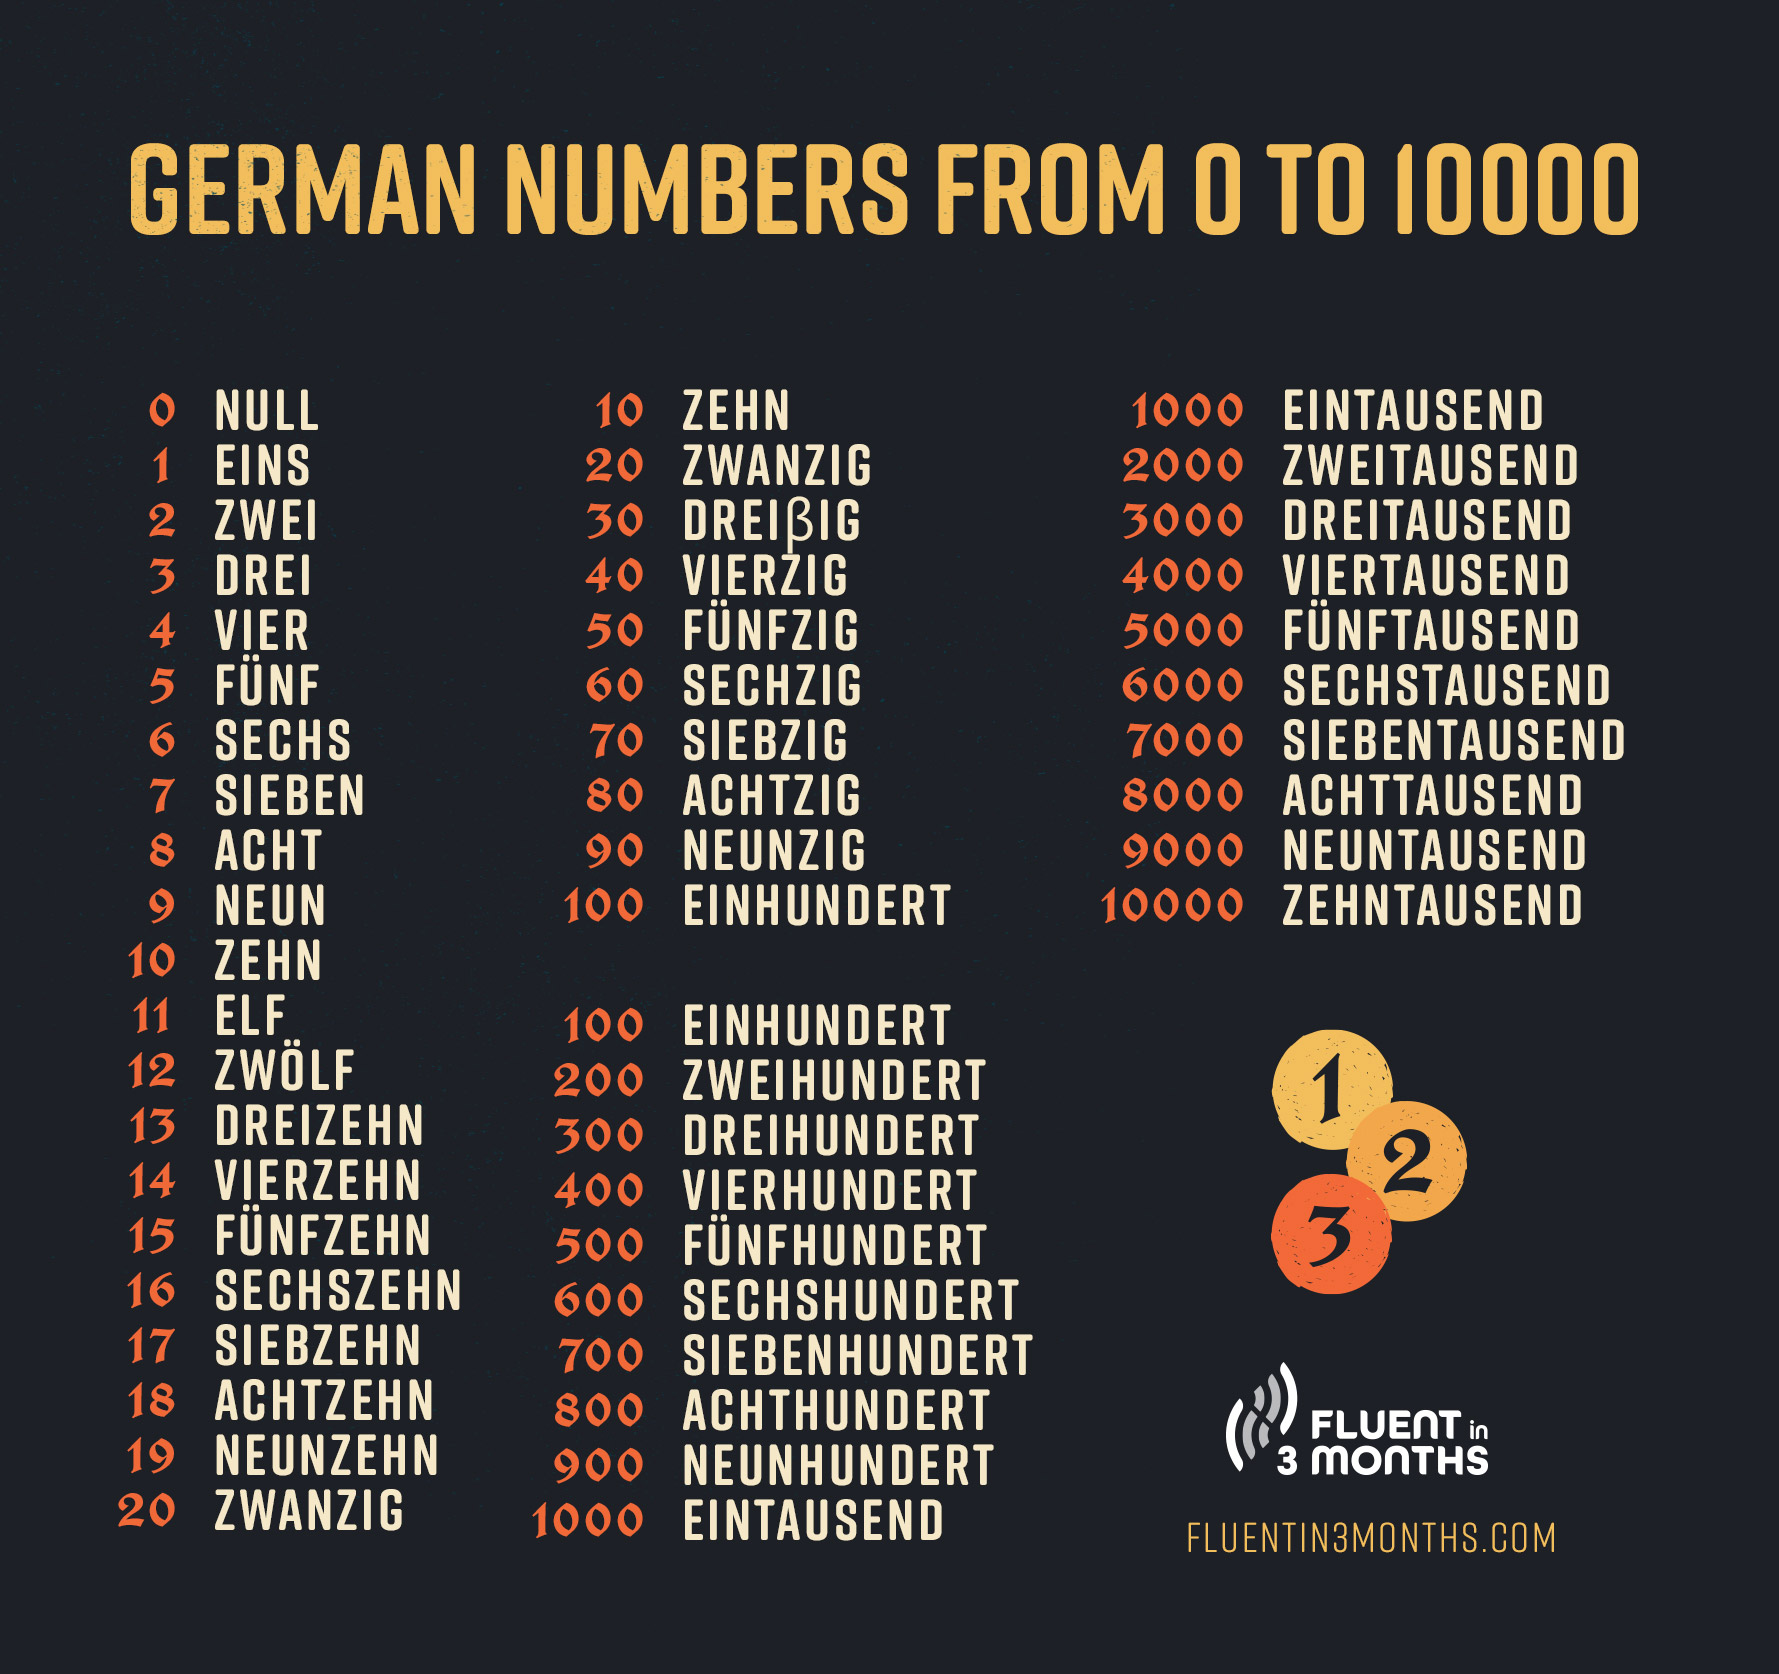 How to pronounce or say one thousand - 1000 ? Pronunciation